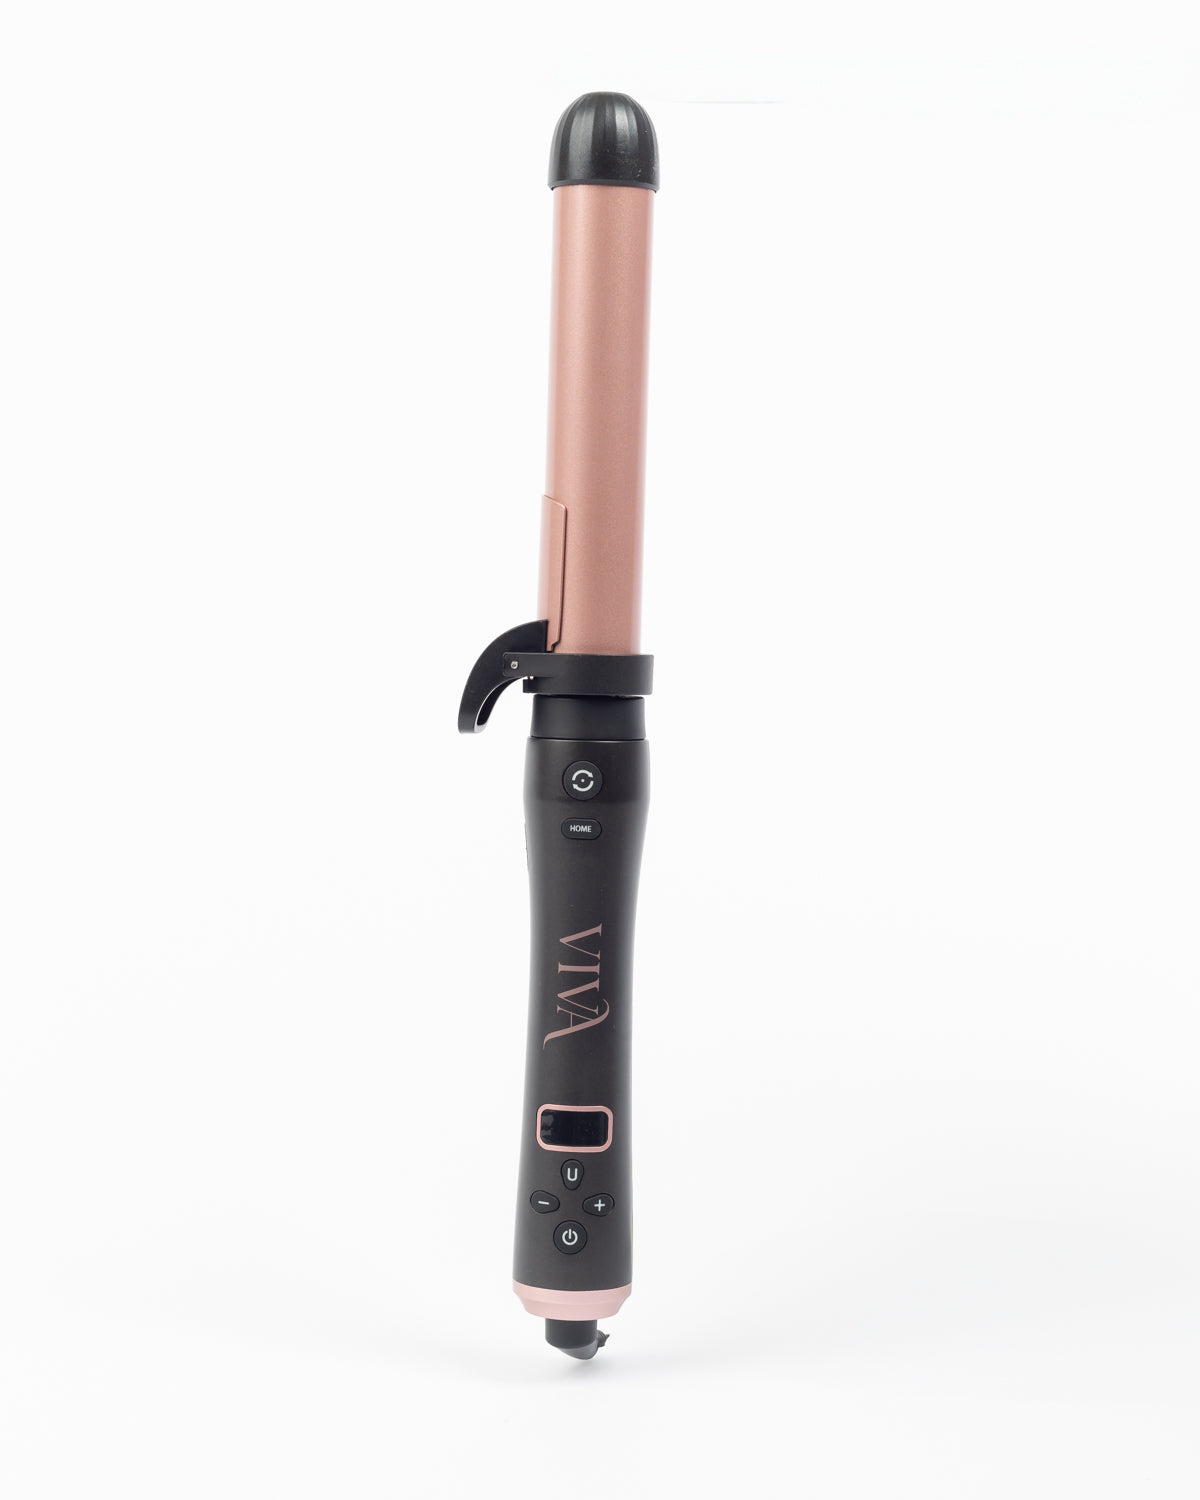 VIVA 3 in 1 automatic rotating hair curler, sleek black and rose gold curling iron with digital controls on a white background.